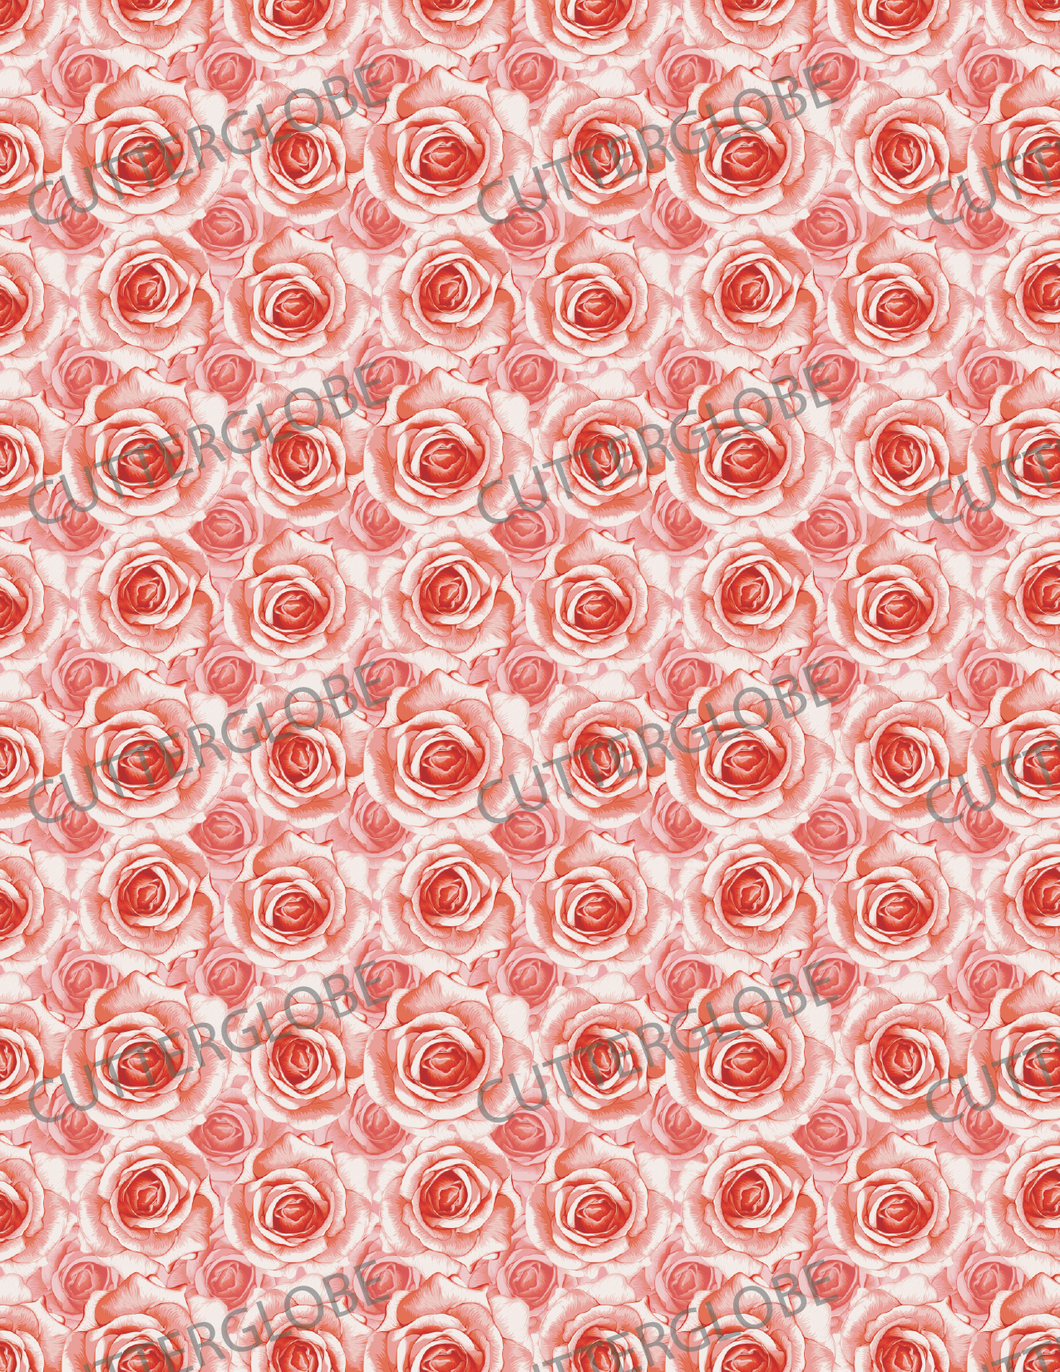 Floral 022 Transfer (Red Roses)